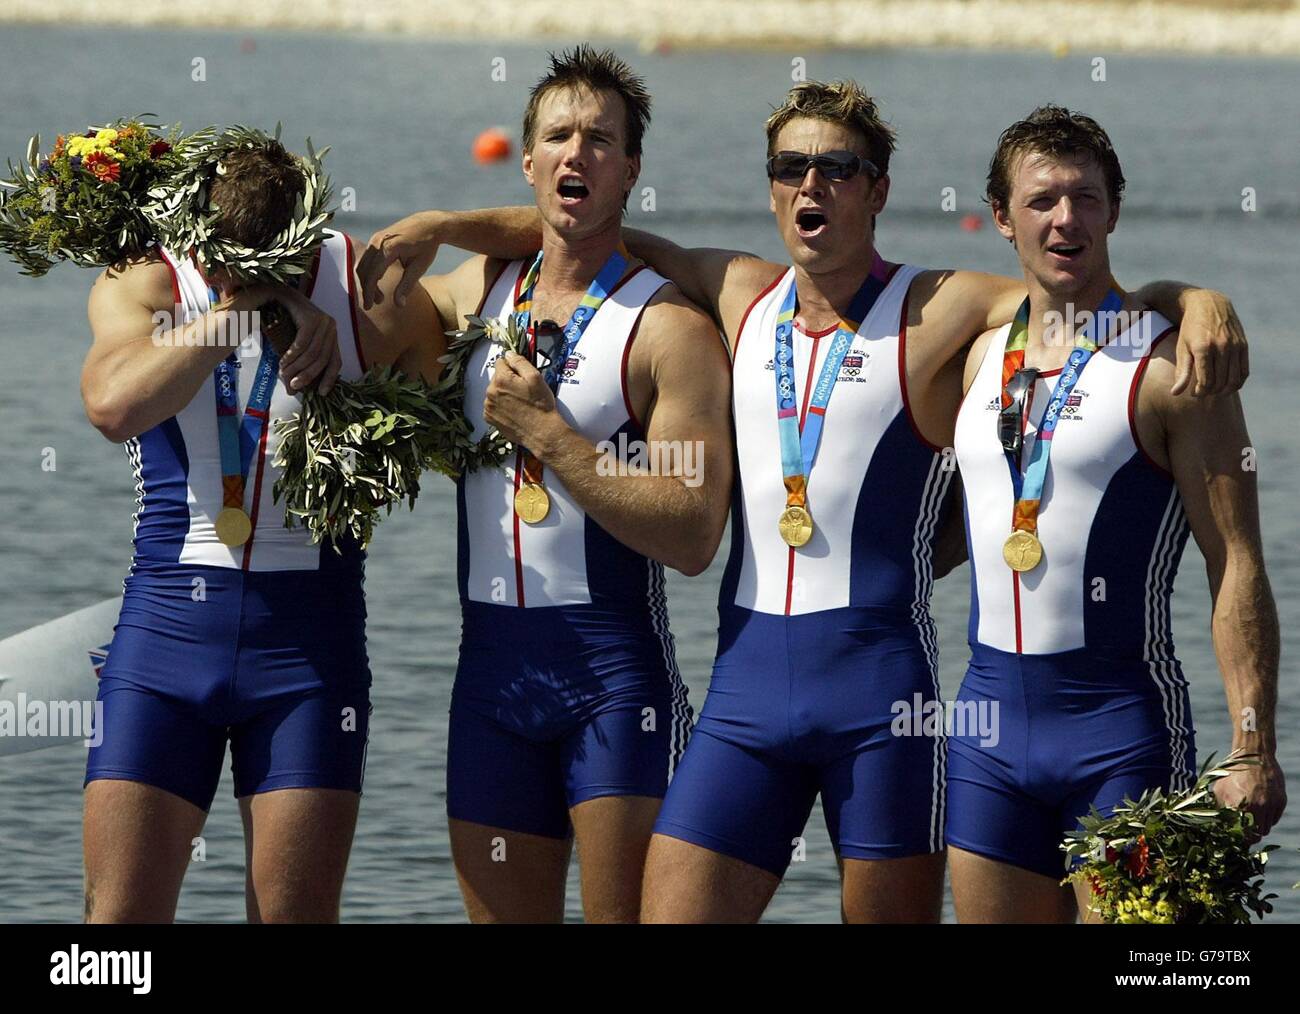 Great Britain's Matthew Pinsent (far left) reacts as his team mates (from left) Ed Coode, James Cracknell and Steve Williams sing the British national anthem following their win in the Men's Four rowing final during the 2004 Olympic Games at the Schinias Olympic Rowing Centre in Athens. Stock Photo